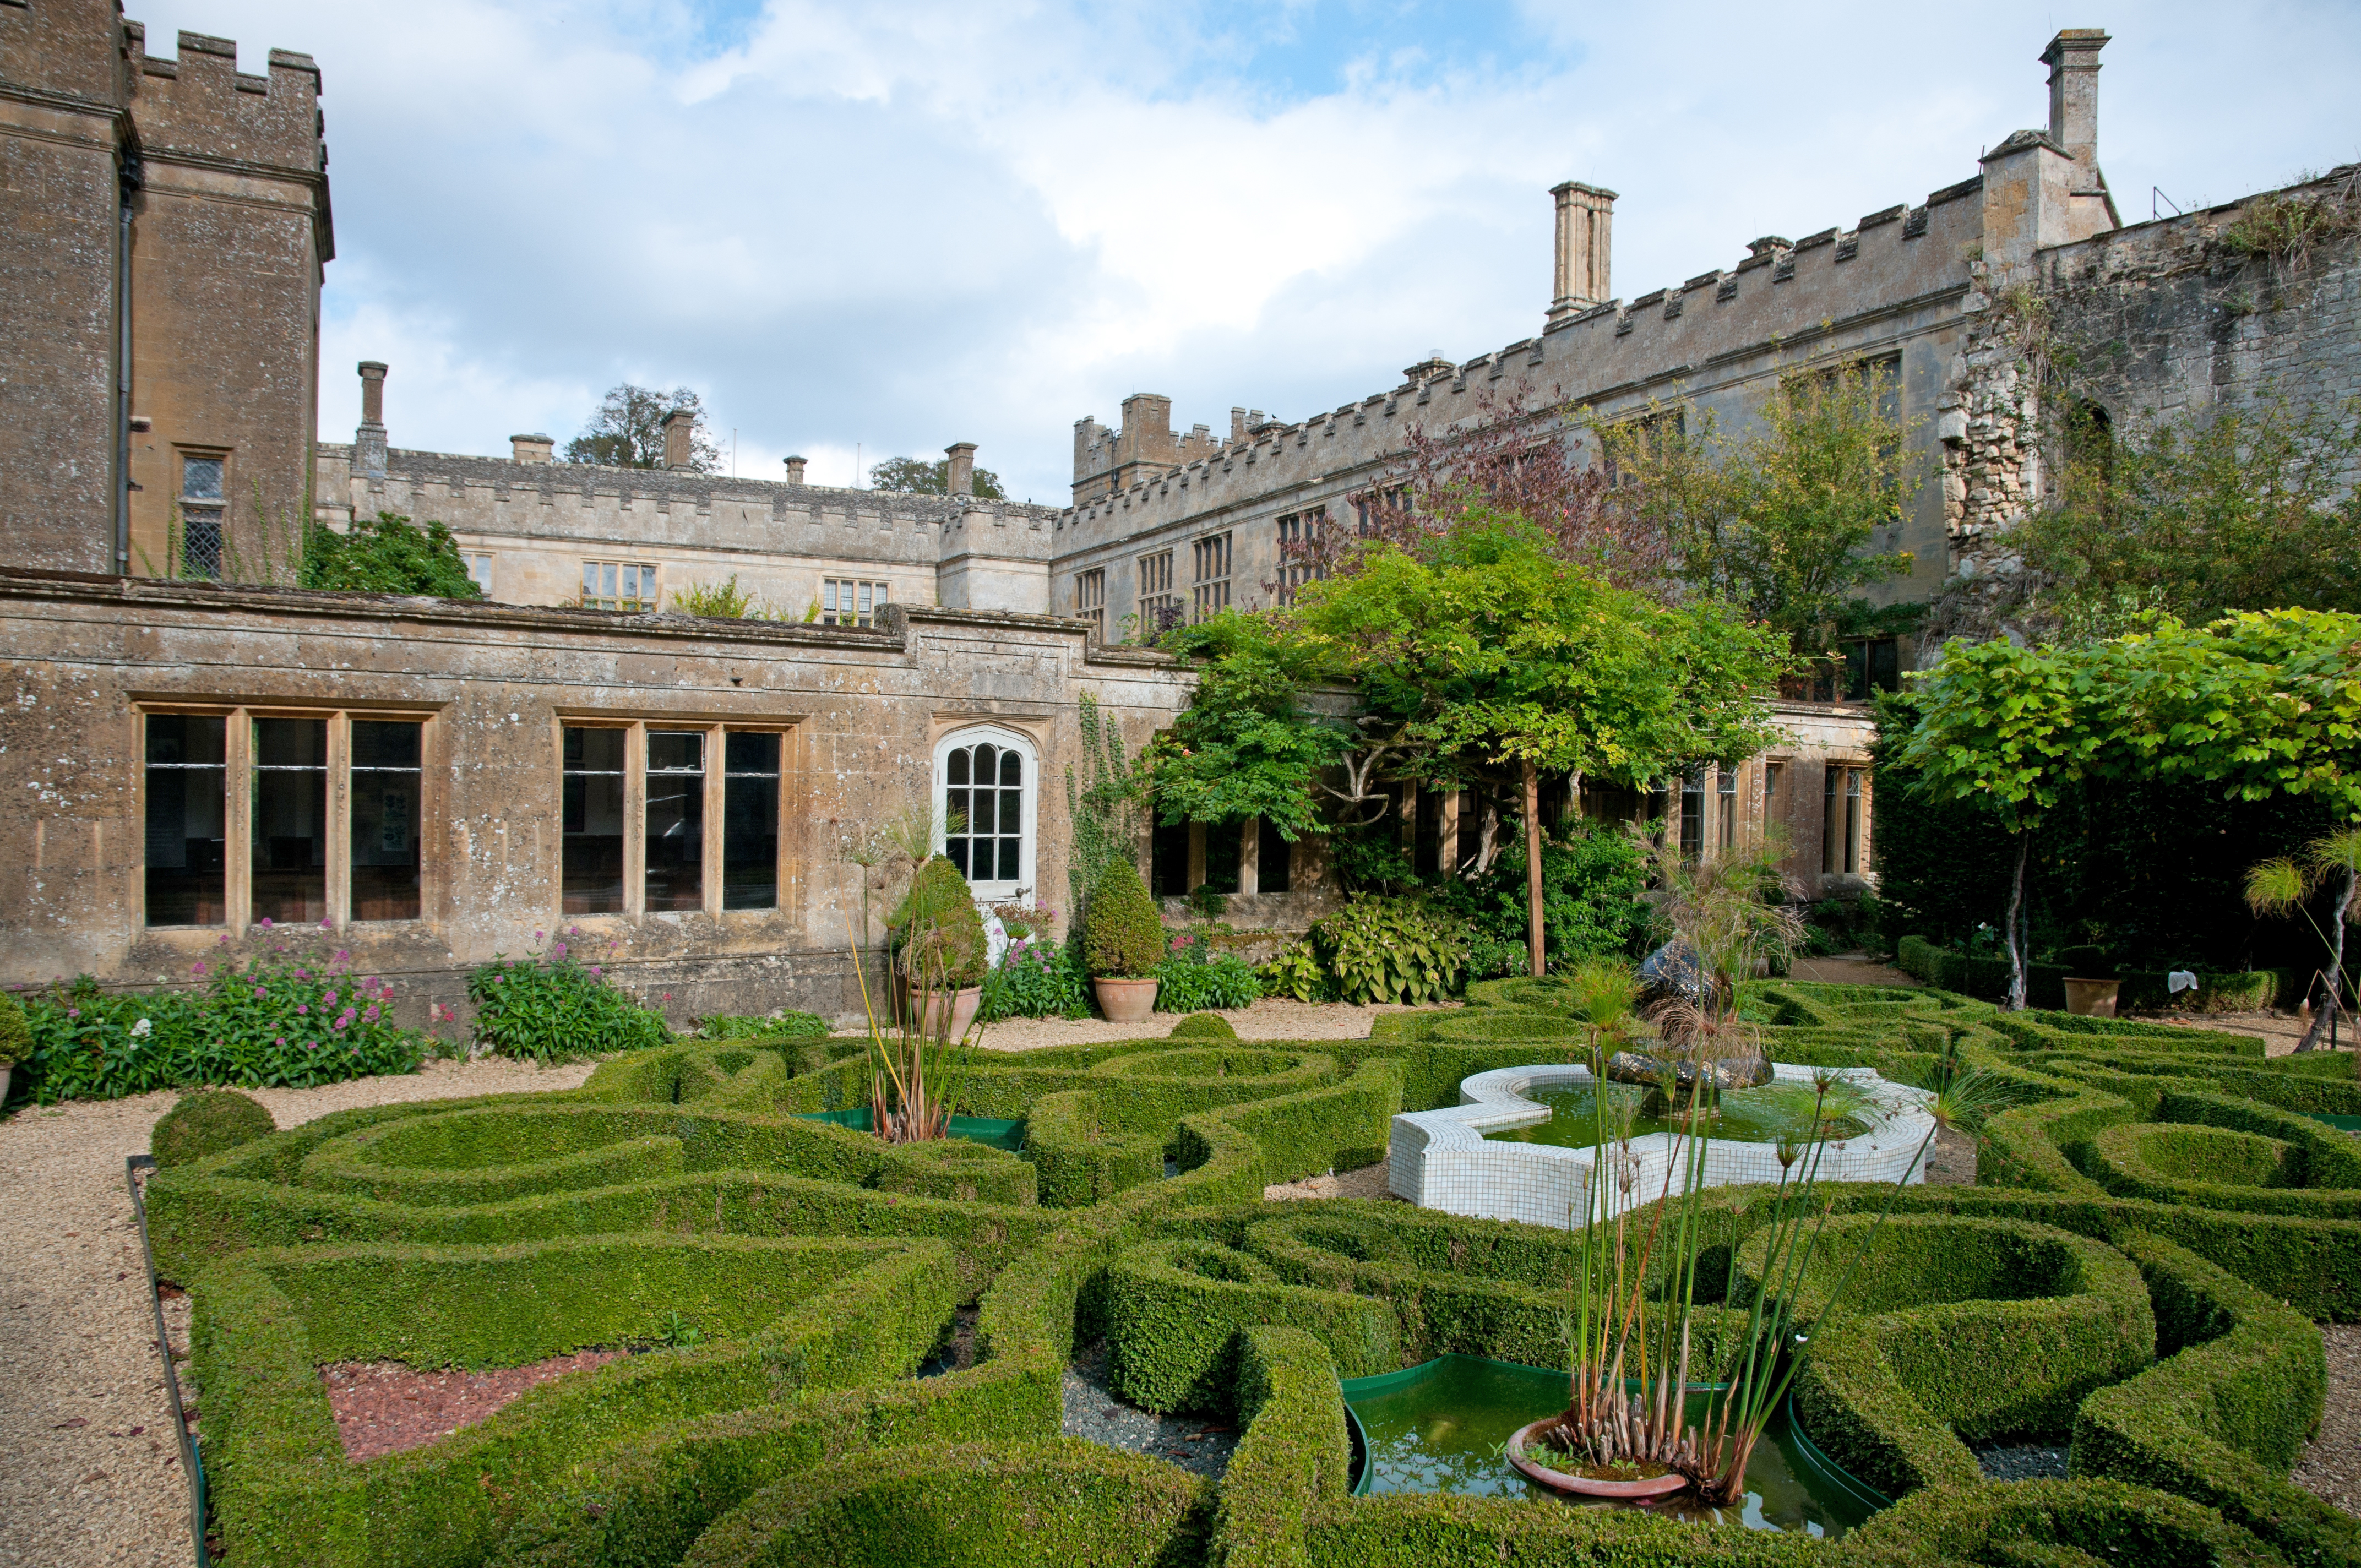 The Knot Garden at Sudeley Castle